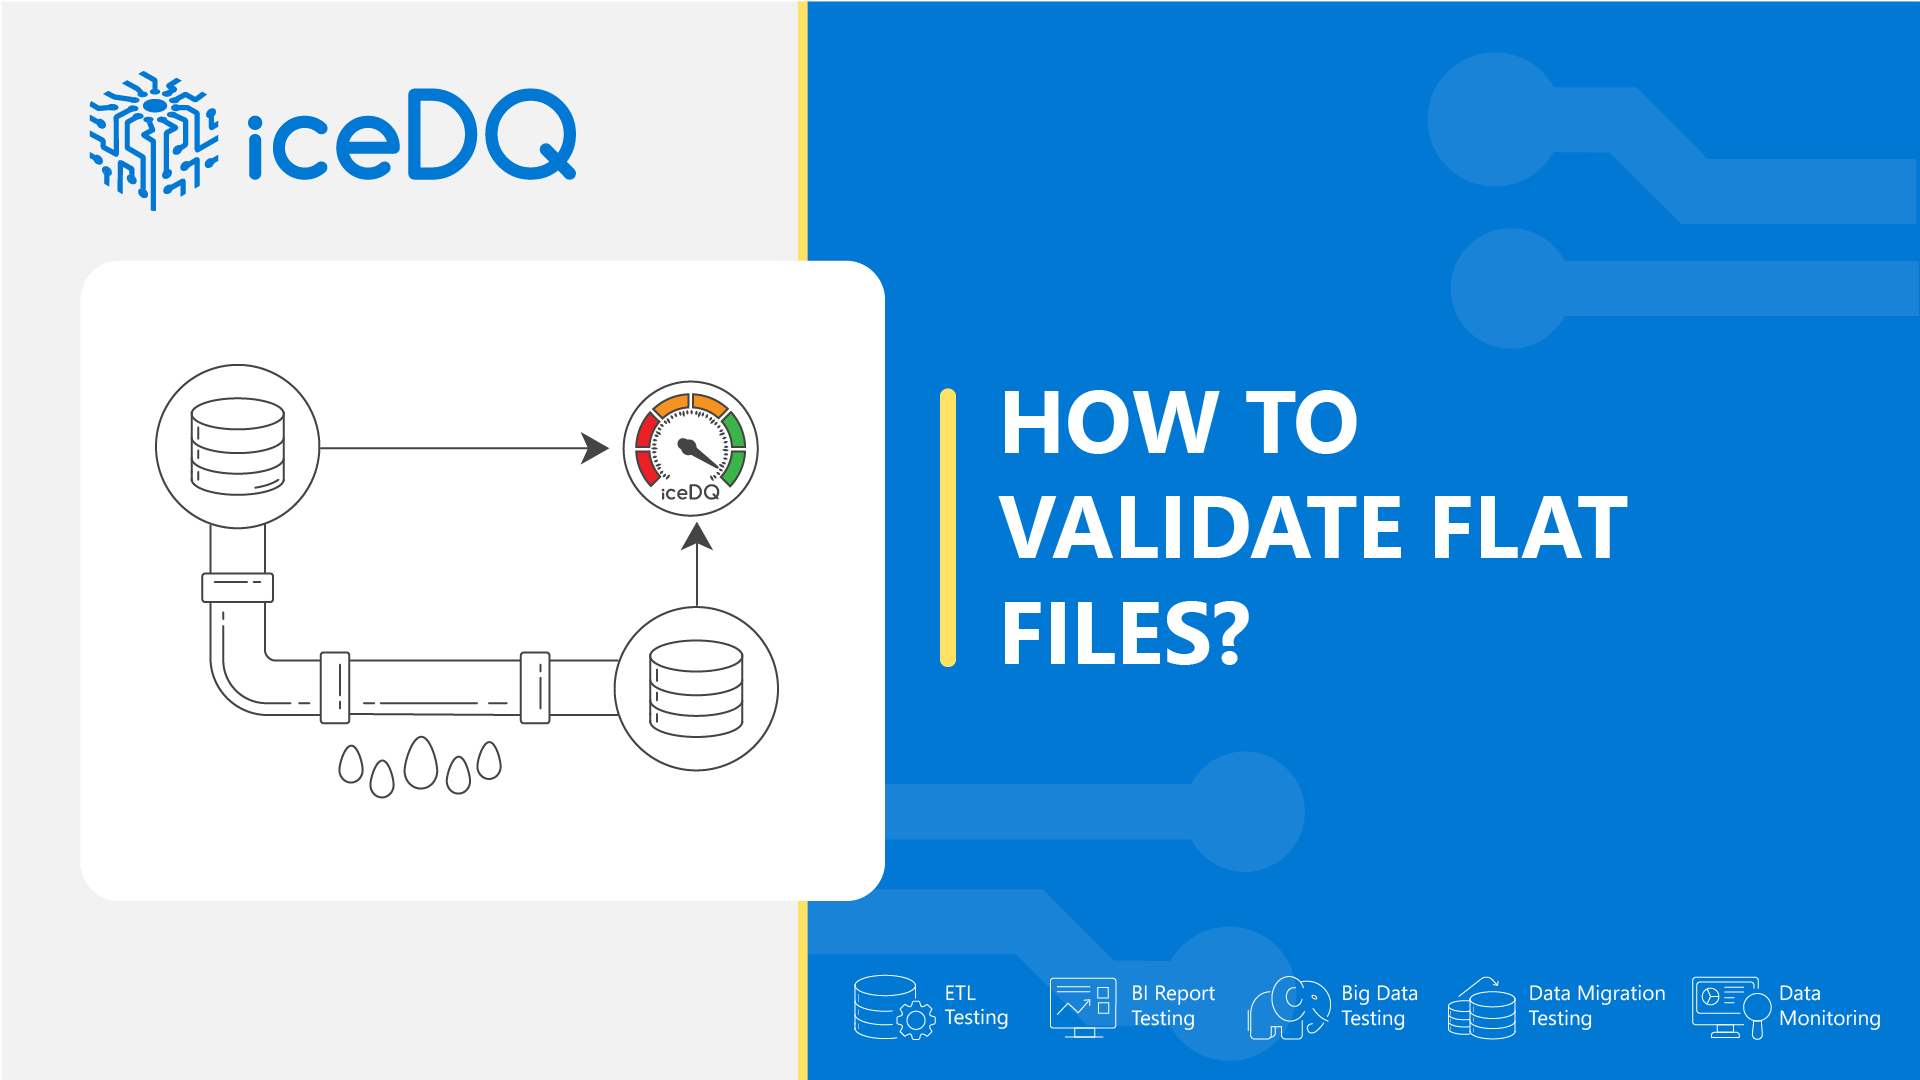 How to Validate Flat Files with iceDQ